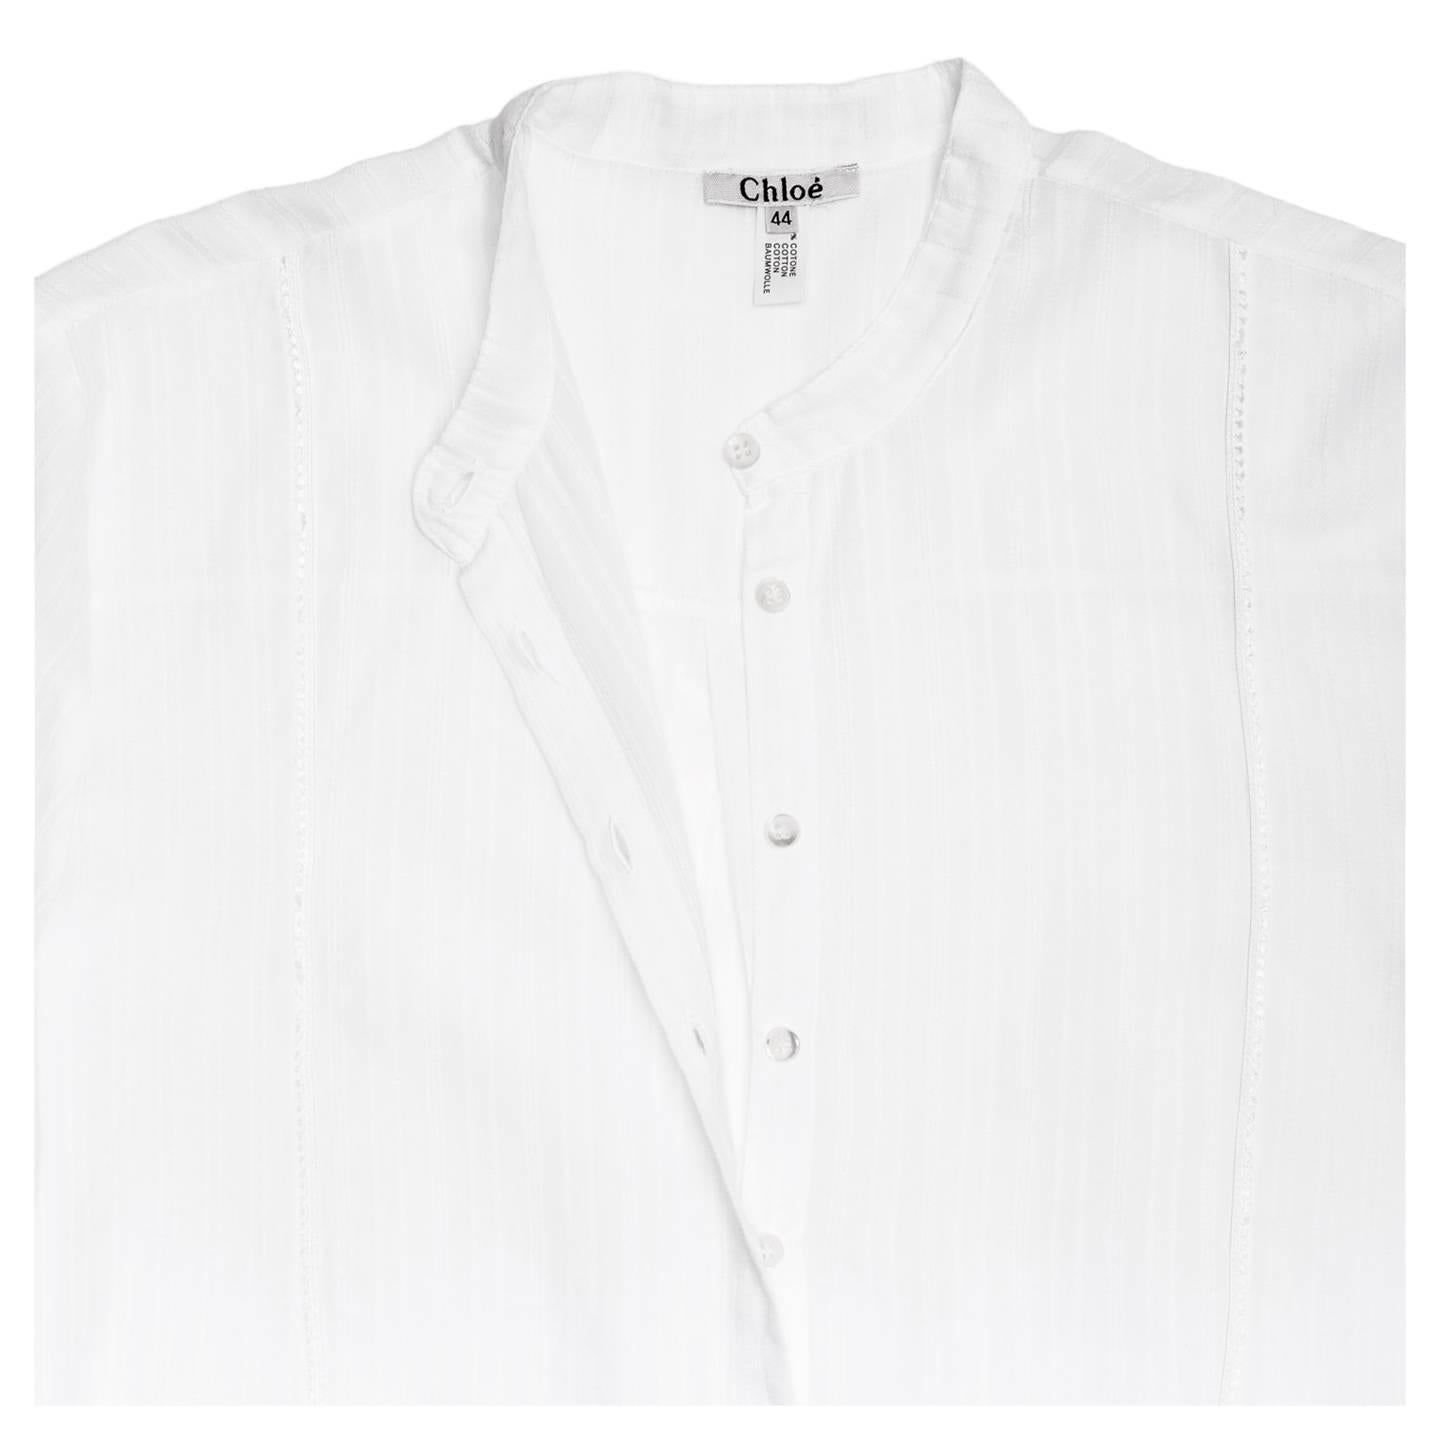 Chloe' White Stiped Jacquard Long Shirt In New Condition For Sale In Brooklyn, NY